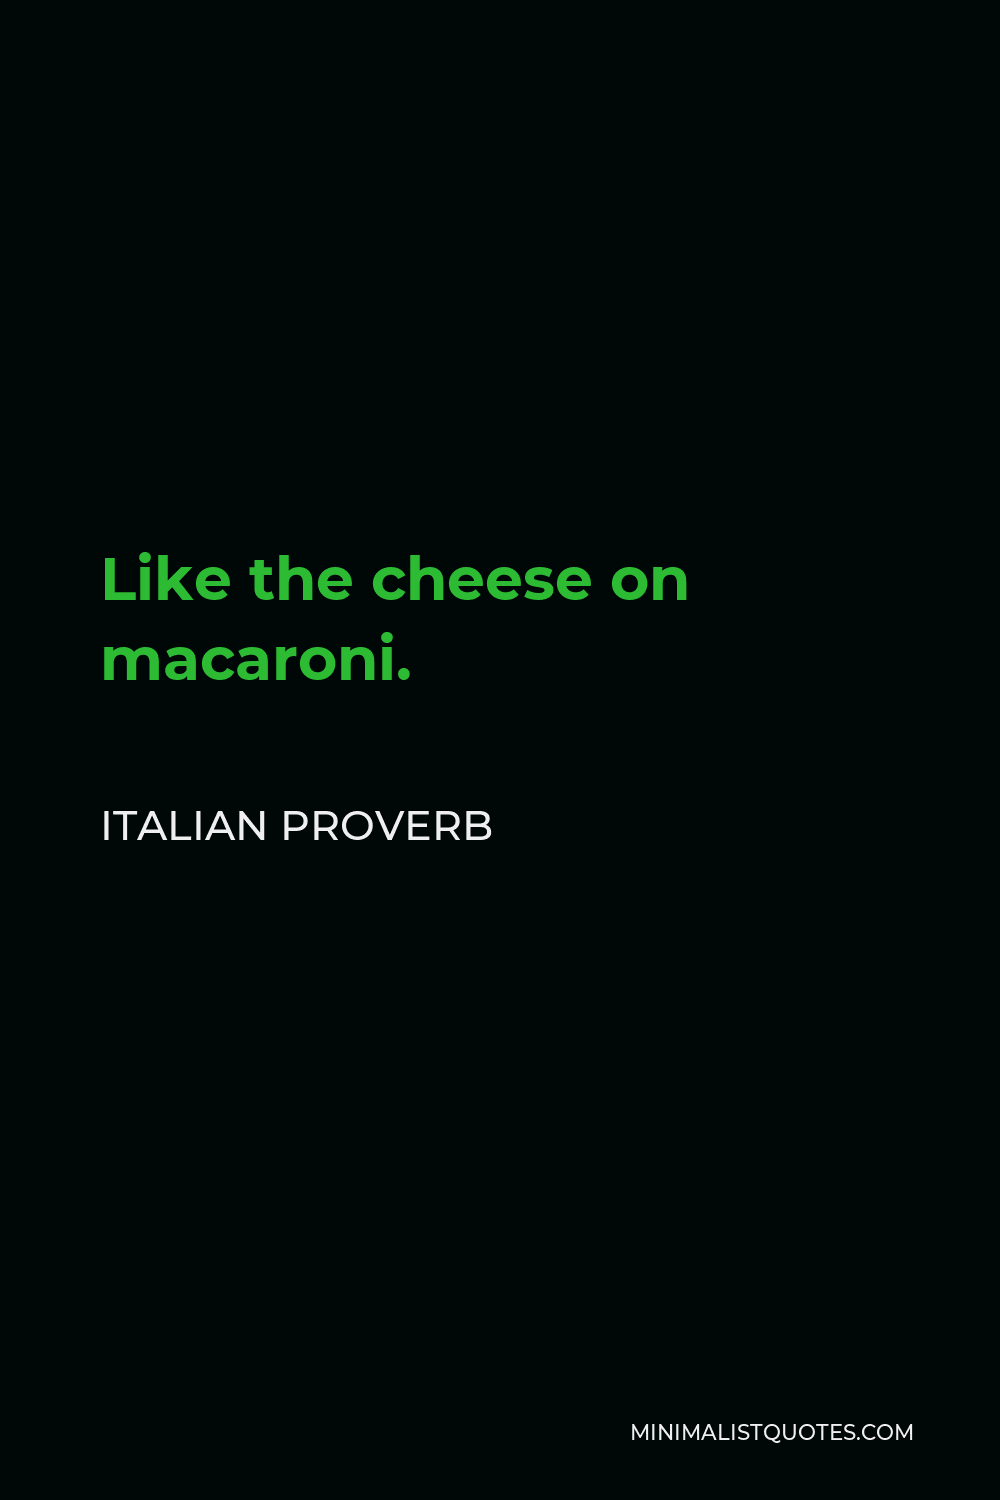 Italian Proverb Quote - Like the cheese on macaroni.